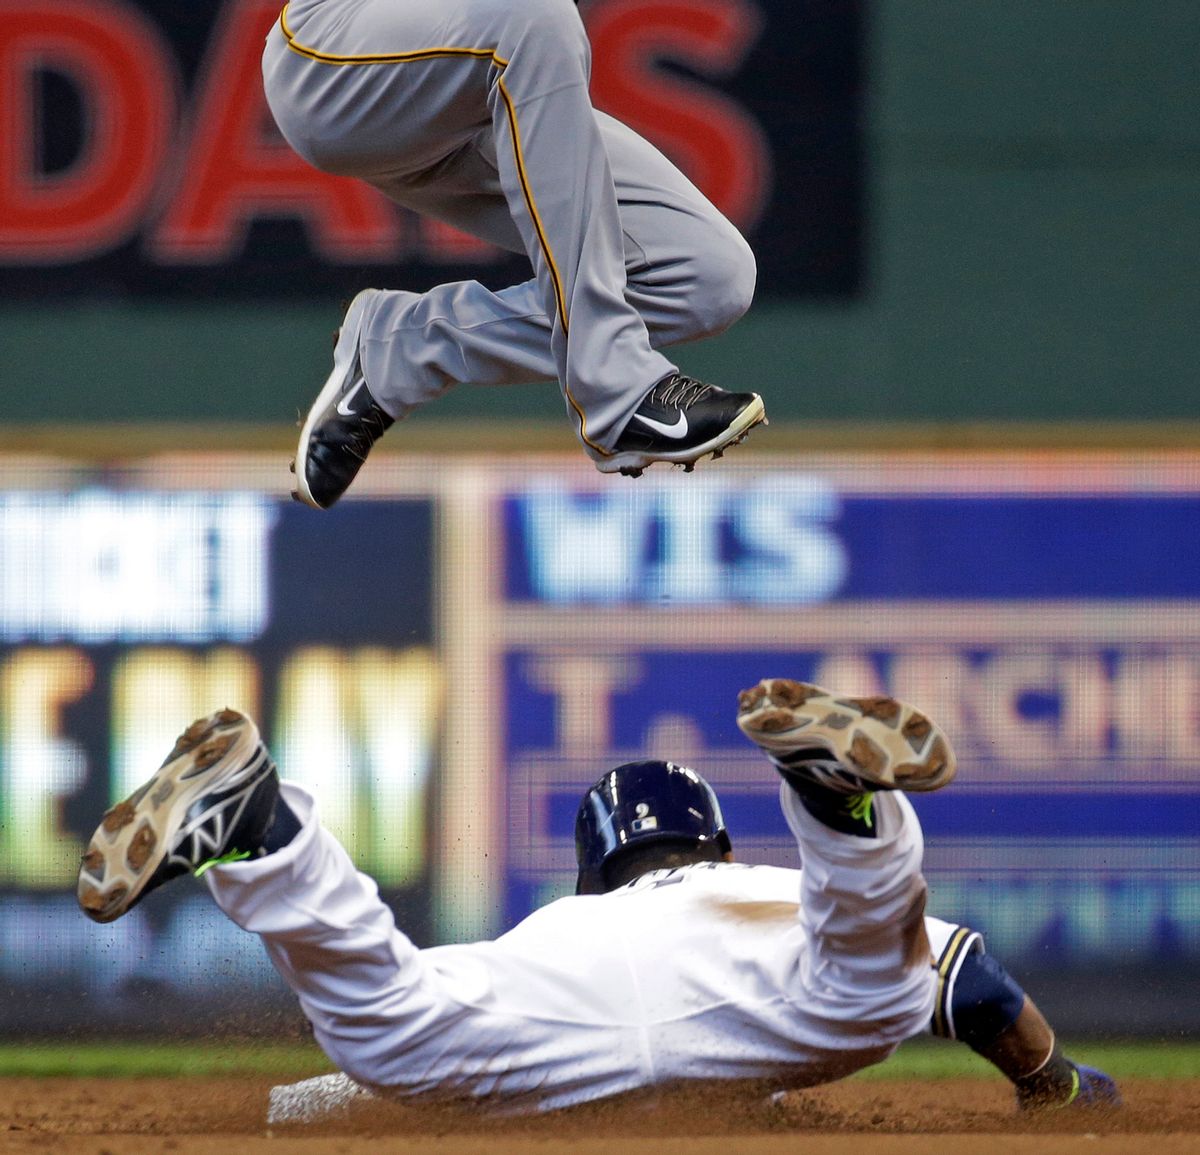 10ThingstoSeeSports - Pittsburgh Pirates shortstop Jordy Mercer can't handle a high throw as he leaps over Milwaukee Brewers' Jean Segura stealing second during the third inning of a baseball game Thursday, May 15, 2014, in Milwaukee. (AP Photo/Morry Gash, File) (AP)